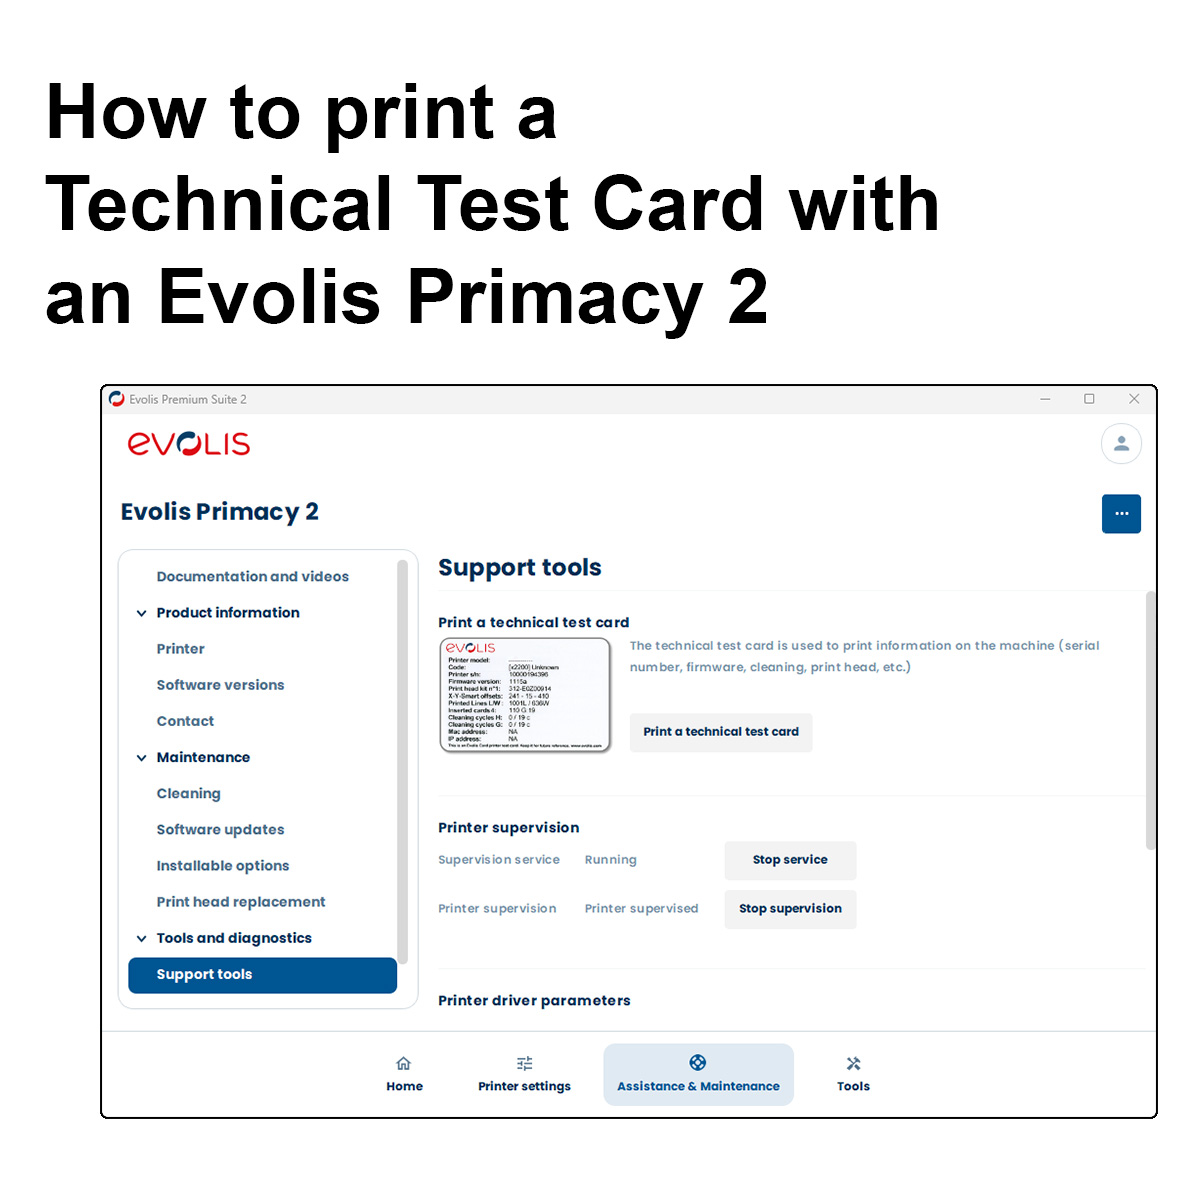 How to print a Technical Test Card with an Evolis Primacy 2